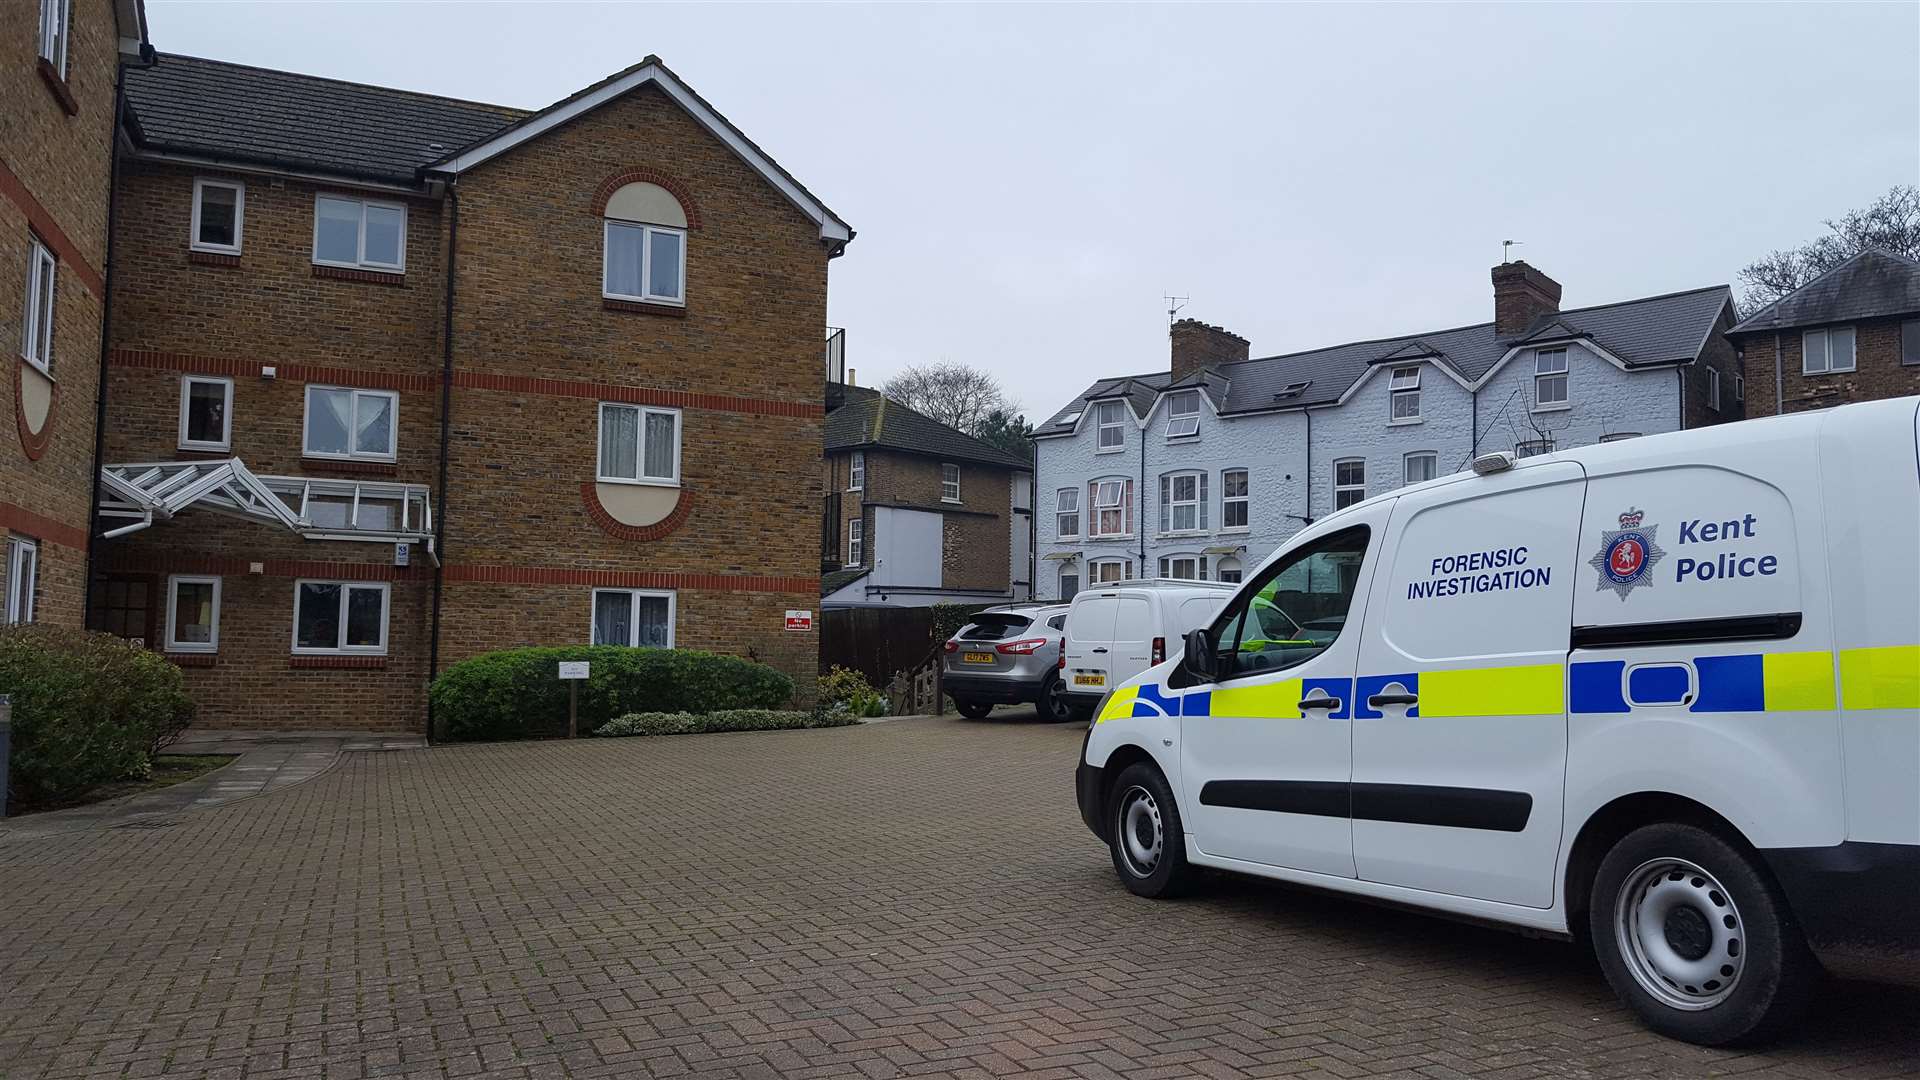 Parwin Quriashi was stabbed 38 times in her home in Kentish Court, Maidstone, on Christmas Day